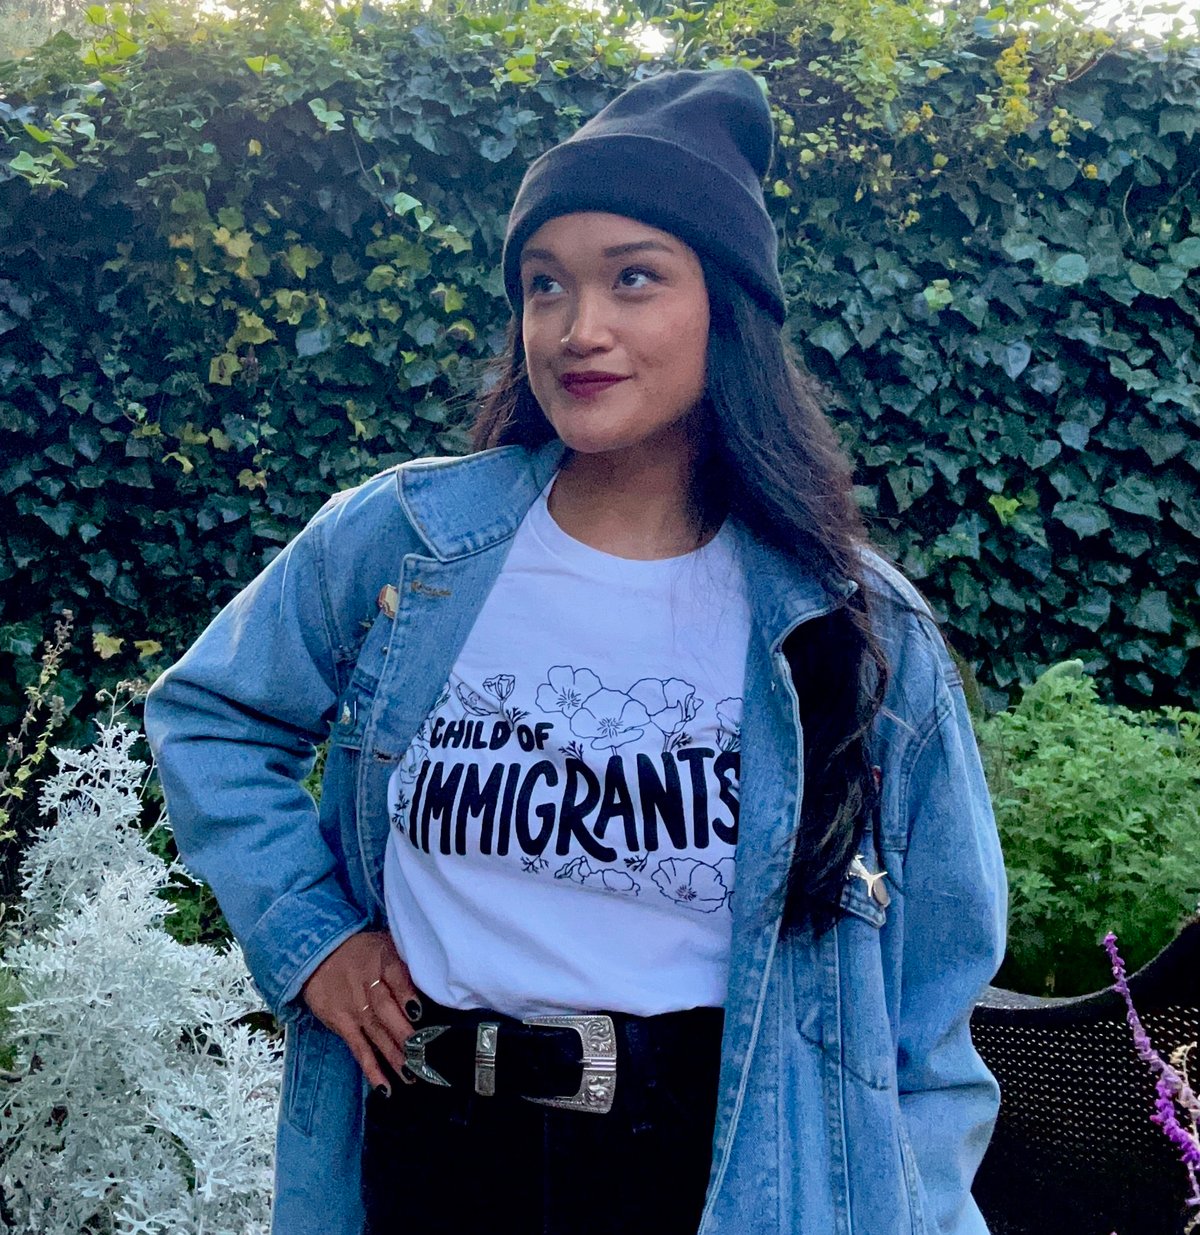 Image of "Child of Immigrants" Tee